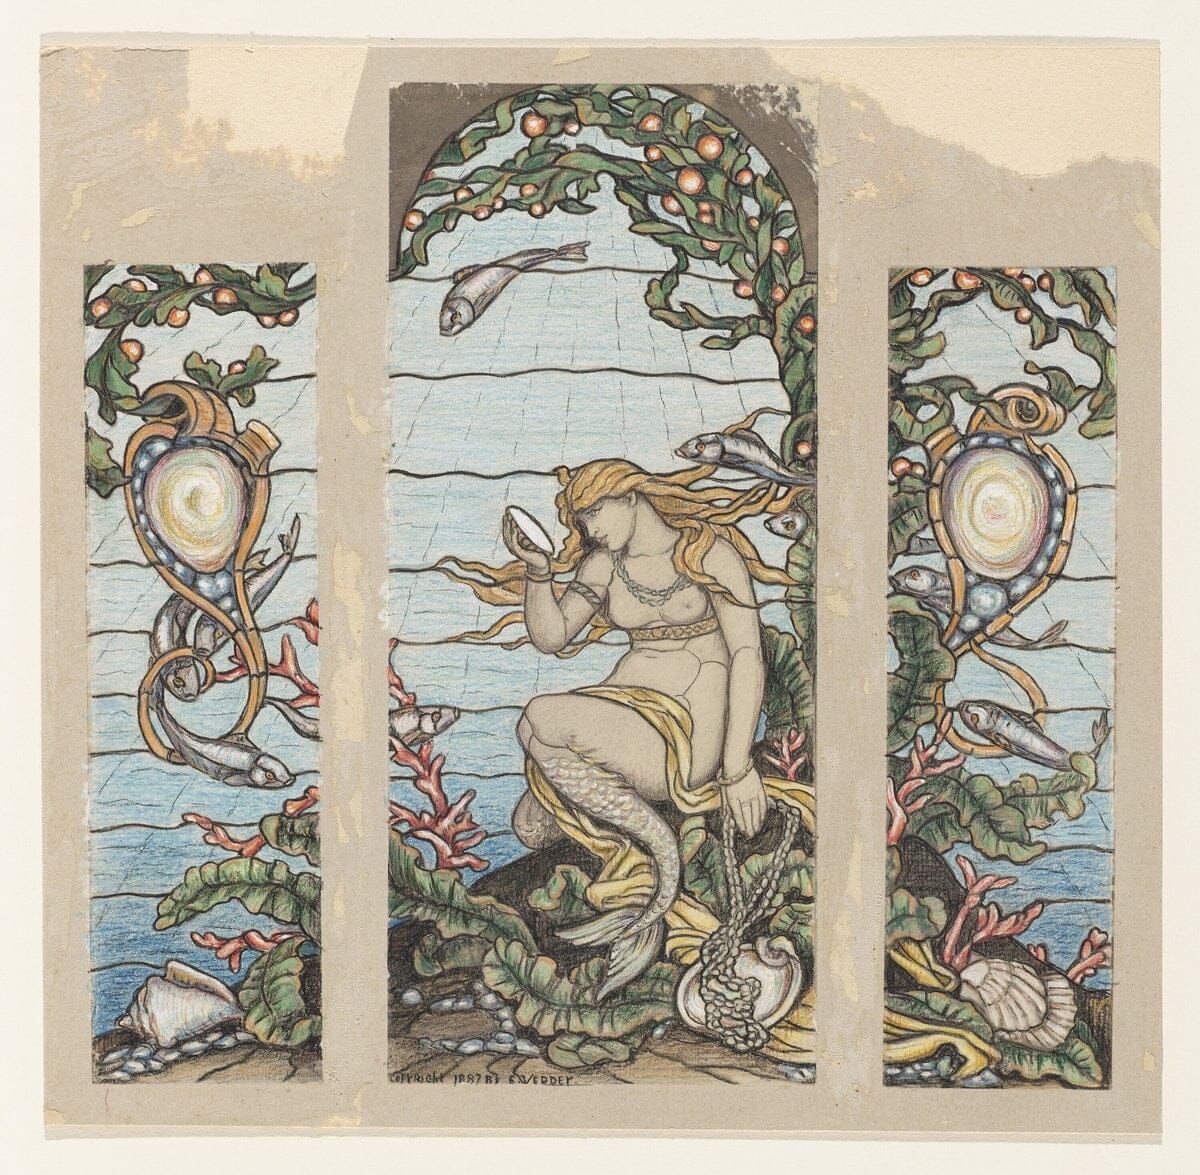 Study for Tiffany & Co stained glass design (c1880) | Mermaid wall art print Posters, Prints, & Visual Artwork The Trumpet Shop   